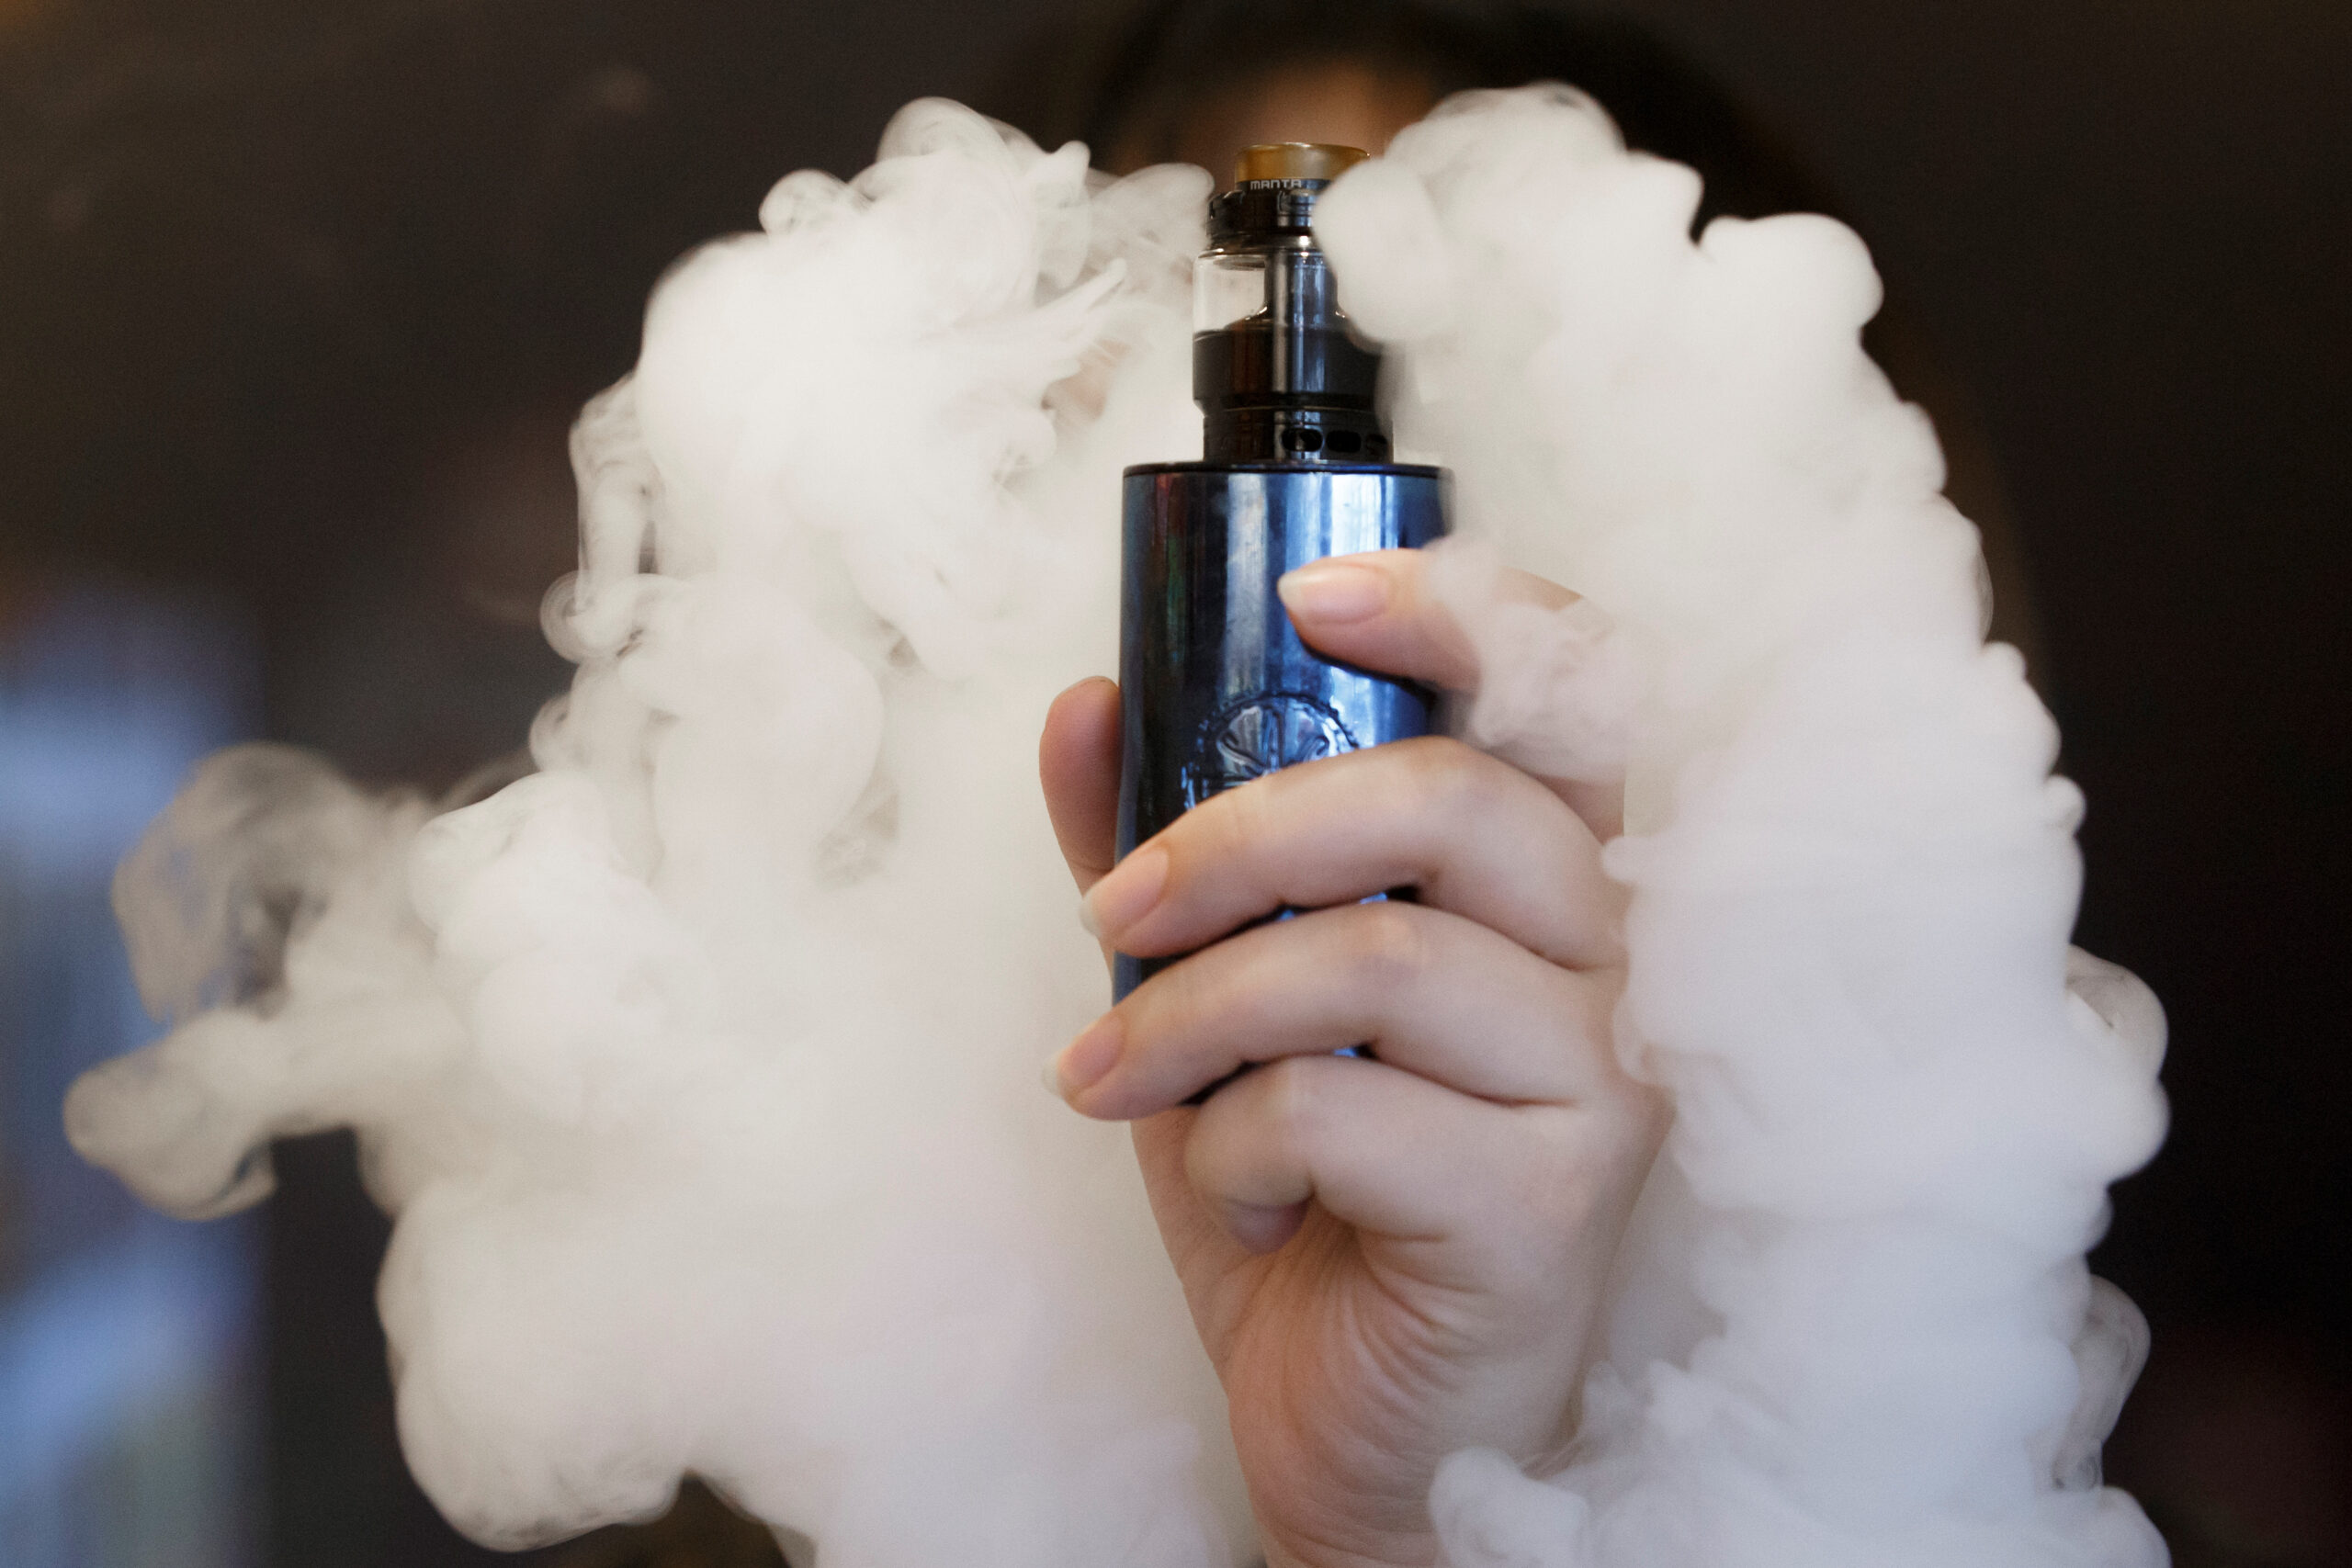 strict regulation of vape needed, says consumer group